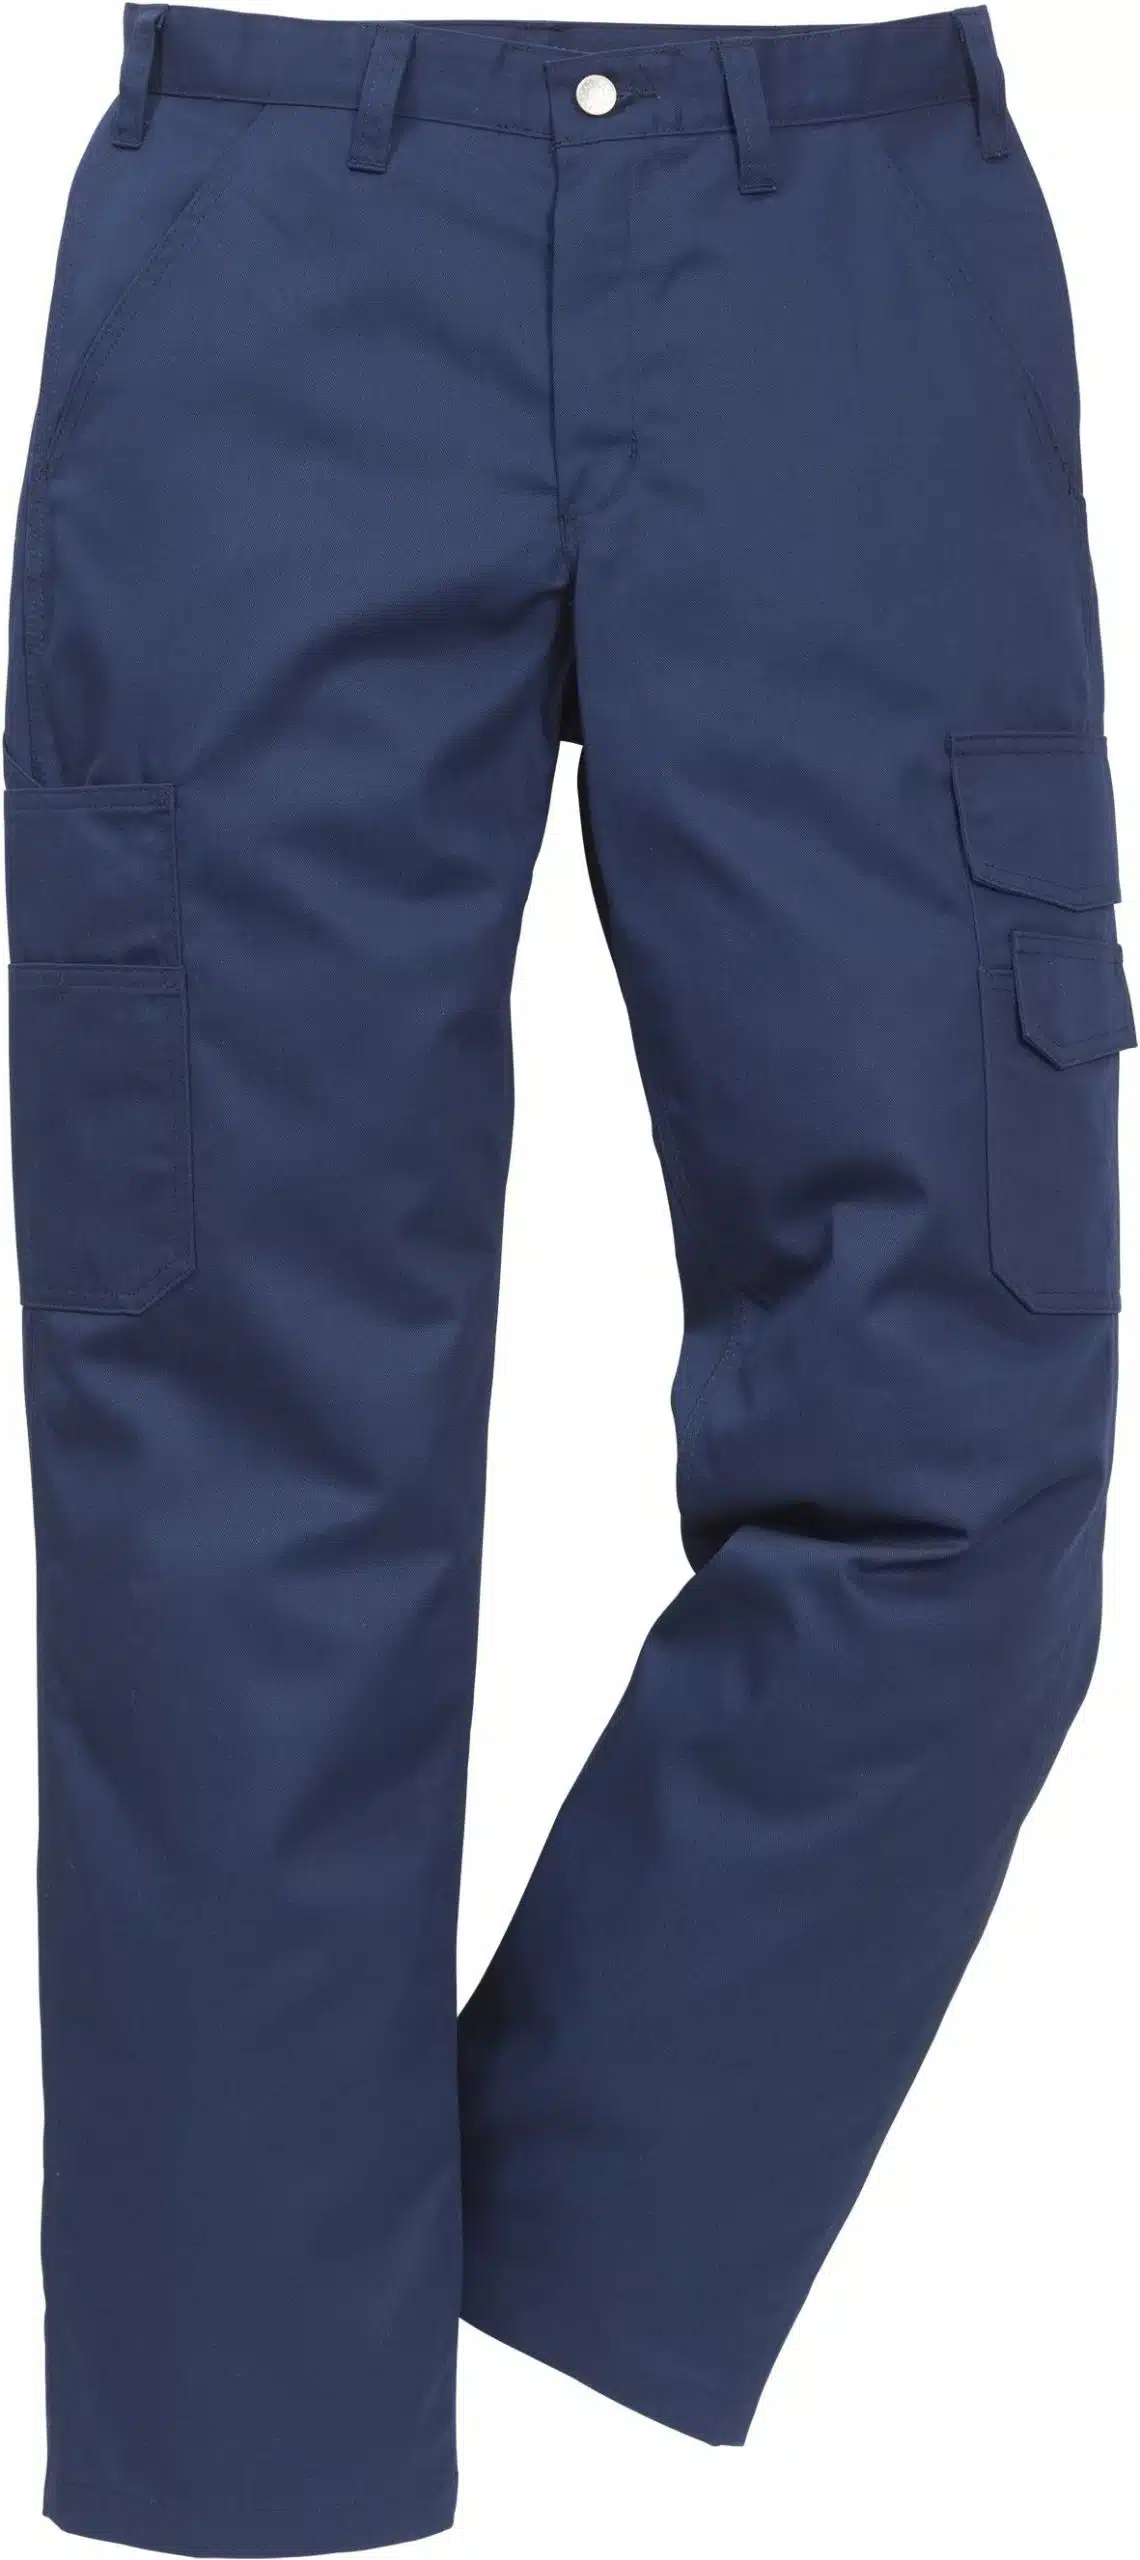 Womens Pro Industry Trousers P154-278-NAVY-C34